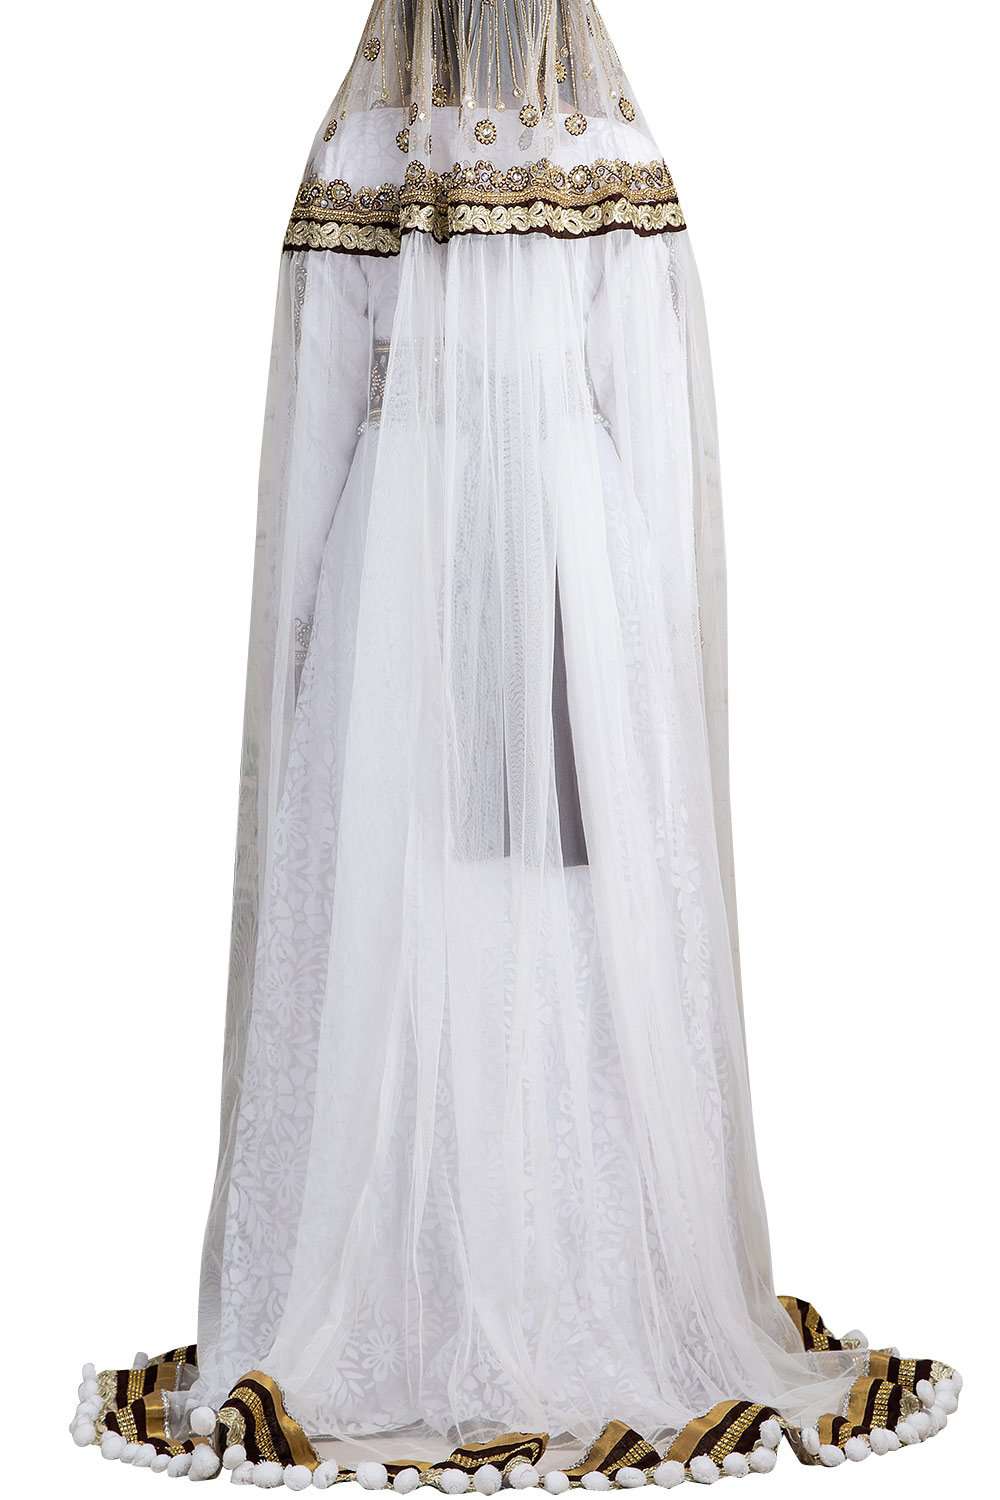 Brown and White Color Crepe With Veil Caftan